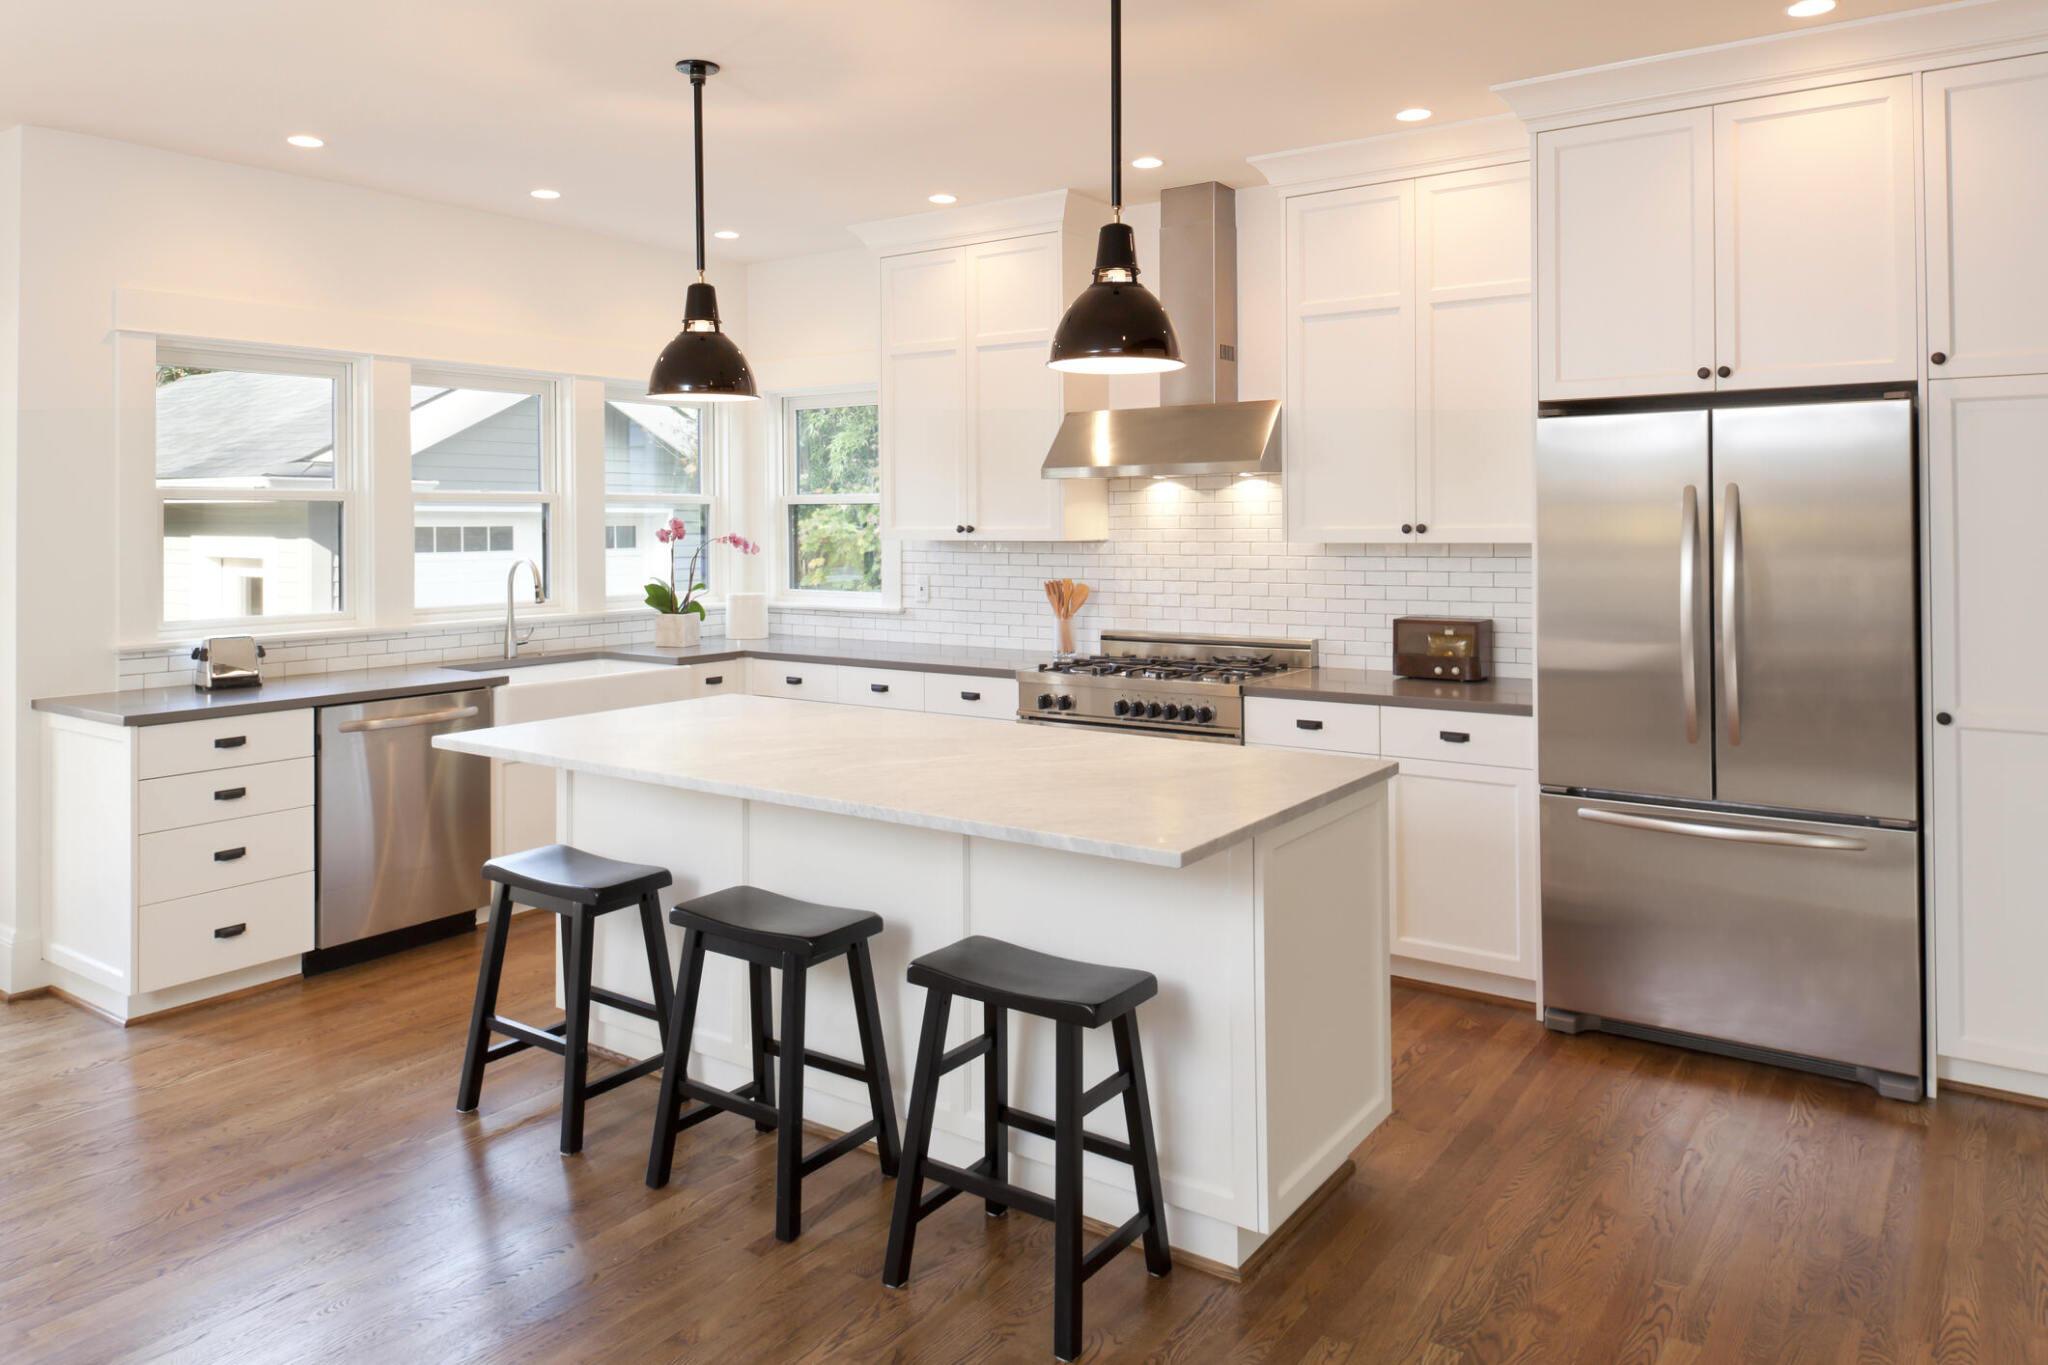 Discover the transformative power of kitchen renovation in